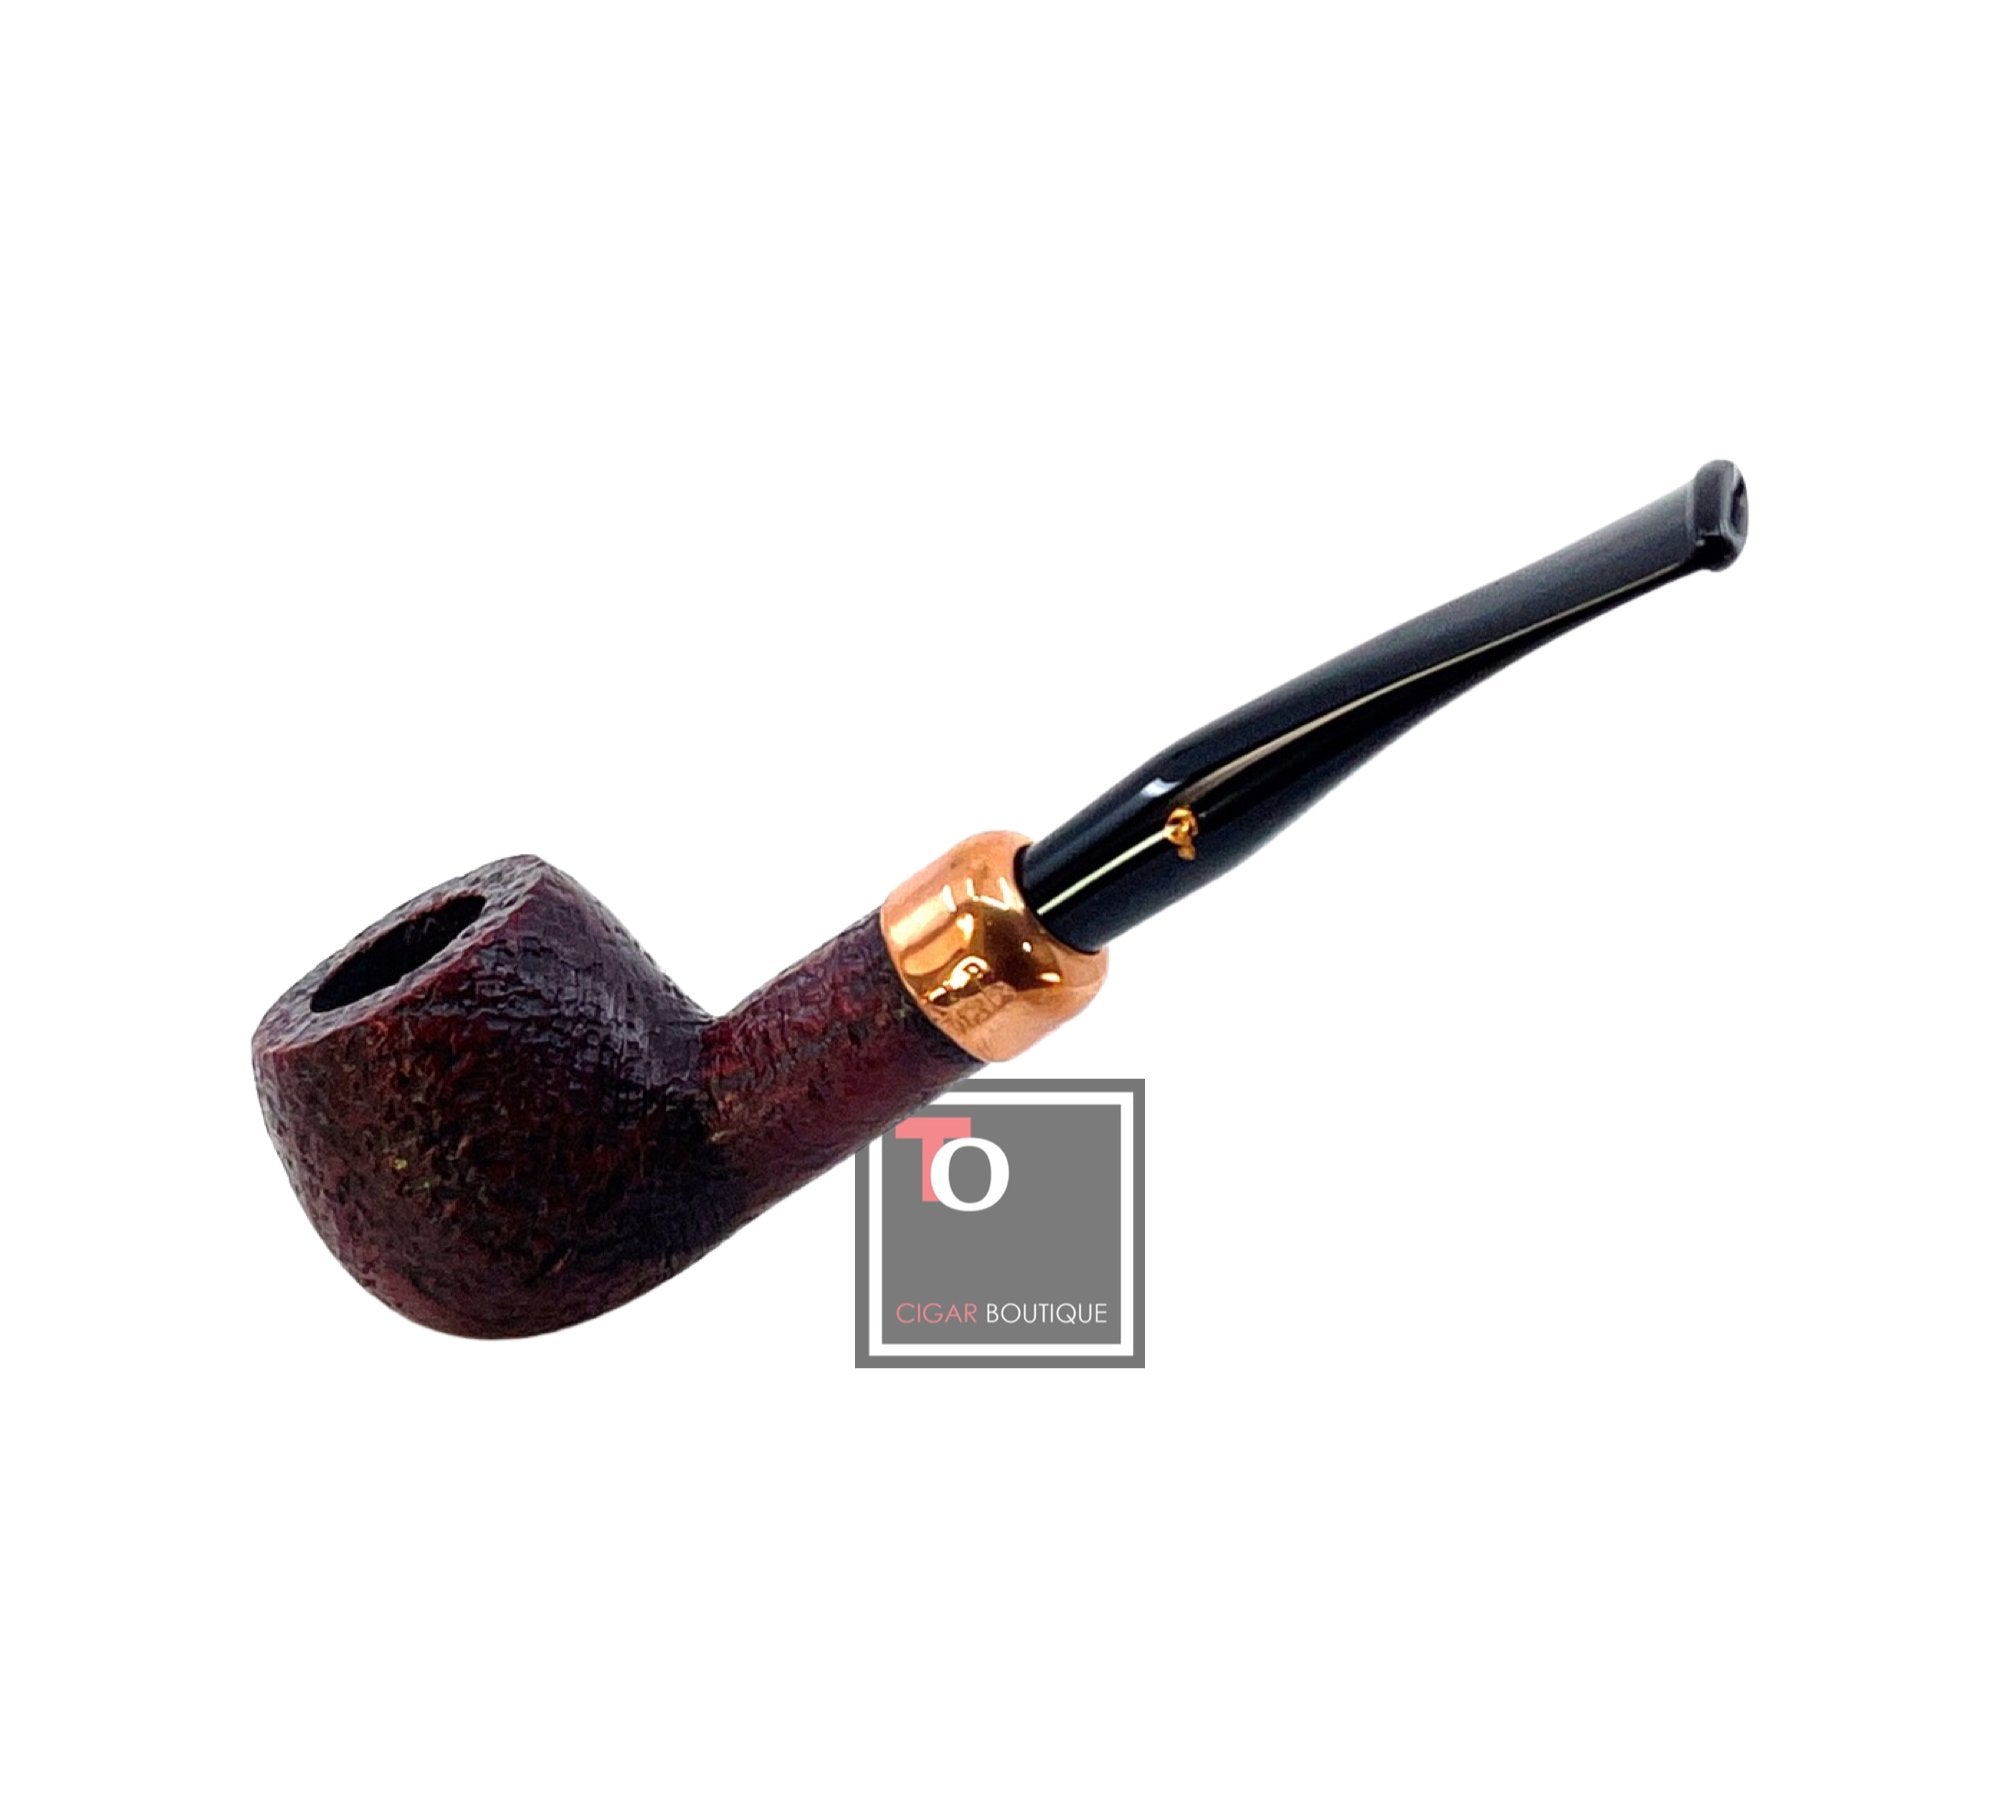 Tobacco Pipes, Briar Pipes, Meerschaum Pipes, Pipe tobacco